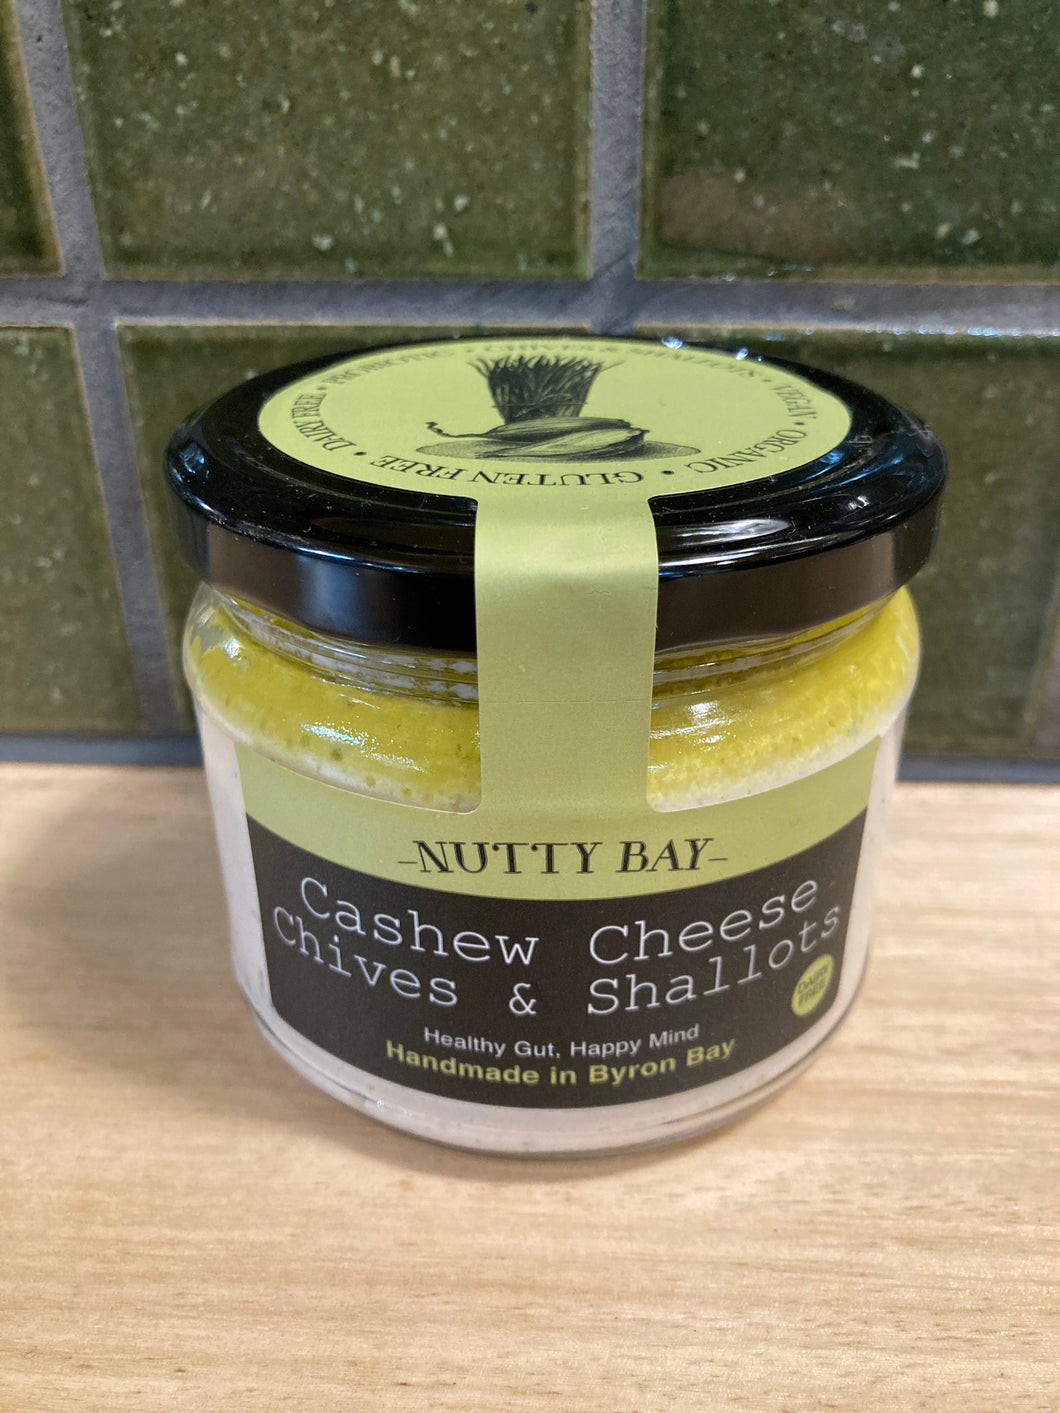 Nutty Bay Cashew Cheese Chive & Shallot 270g